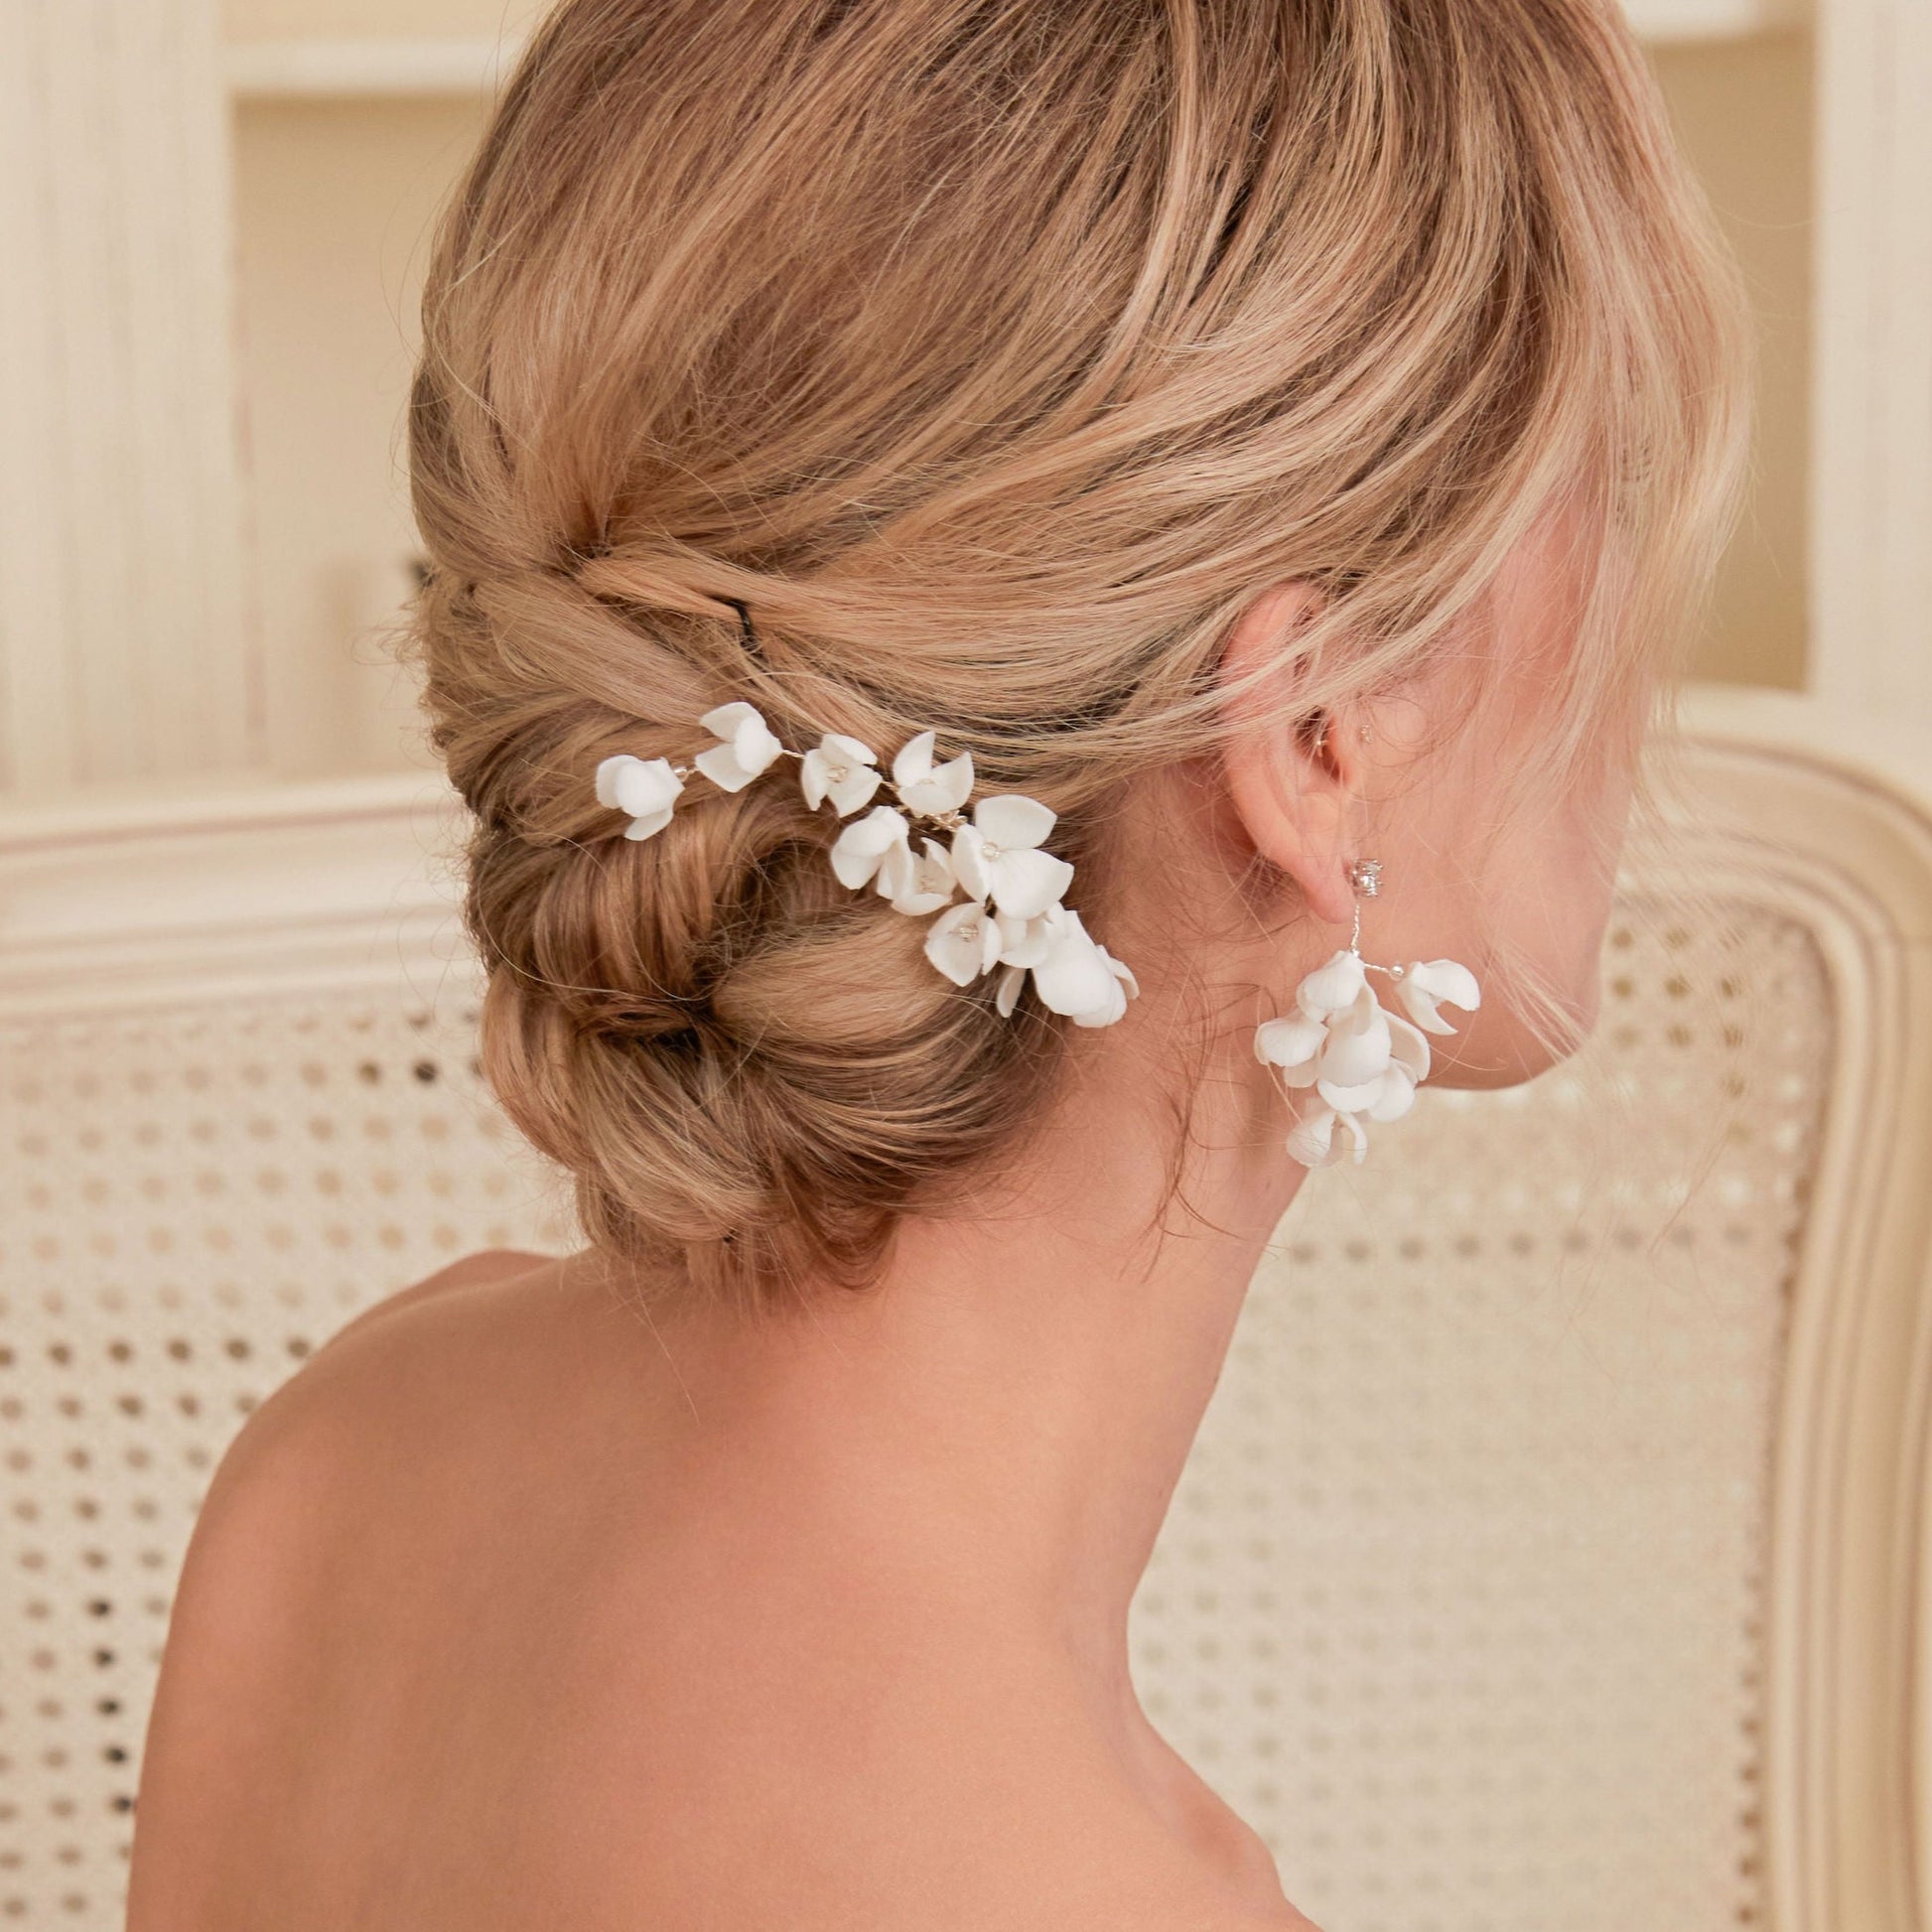 These handcrafted flower bridal earrings are designed to make a statement with their elegant long drop design. Each earring features a cluster of ivory clay blossoms and flowers that gracefully drape from a shimmering rhinestone.